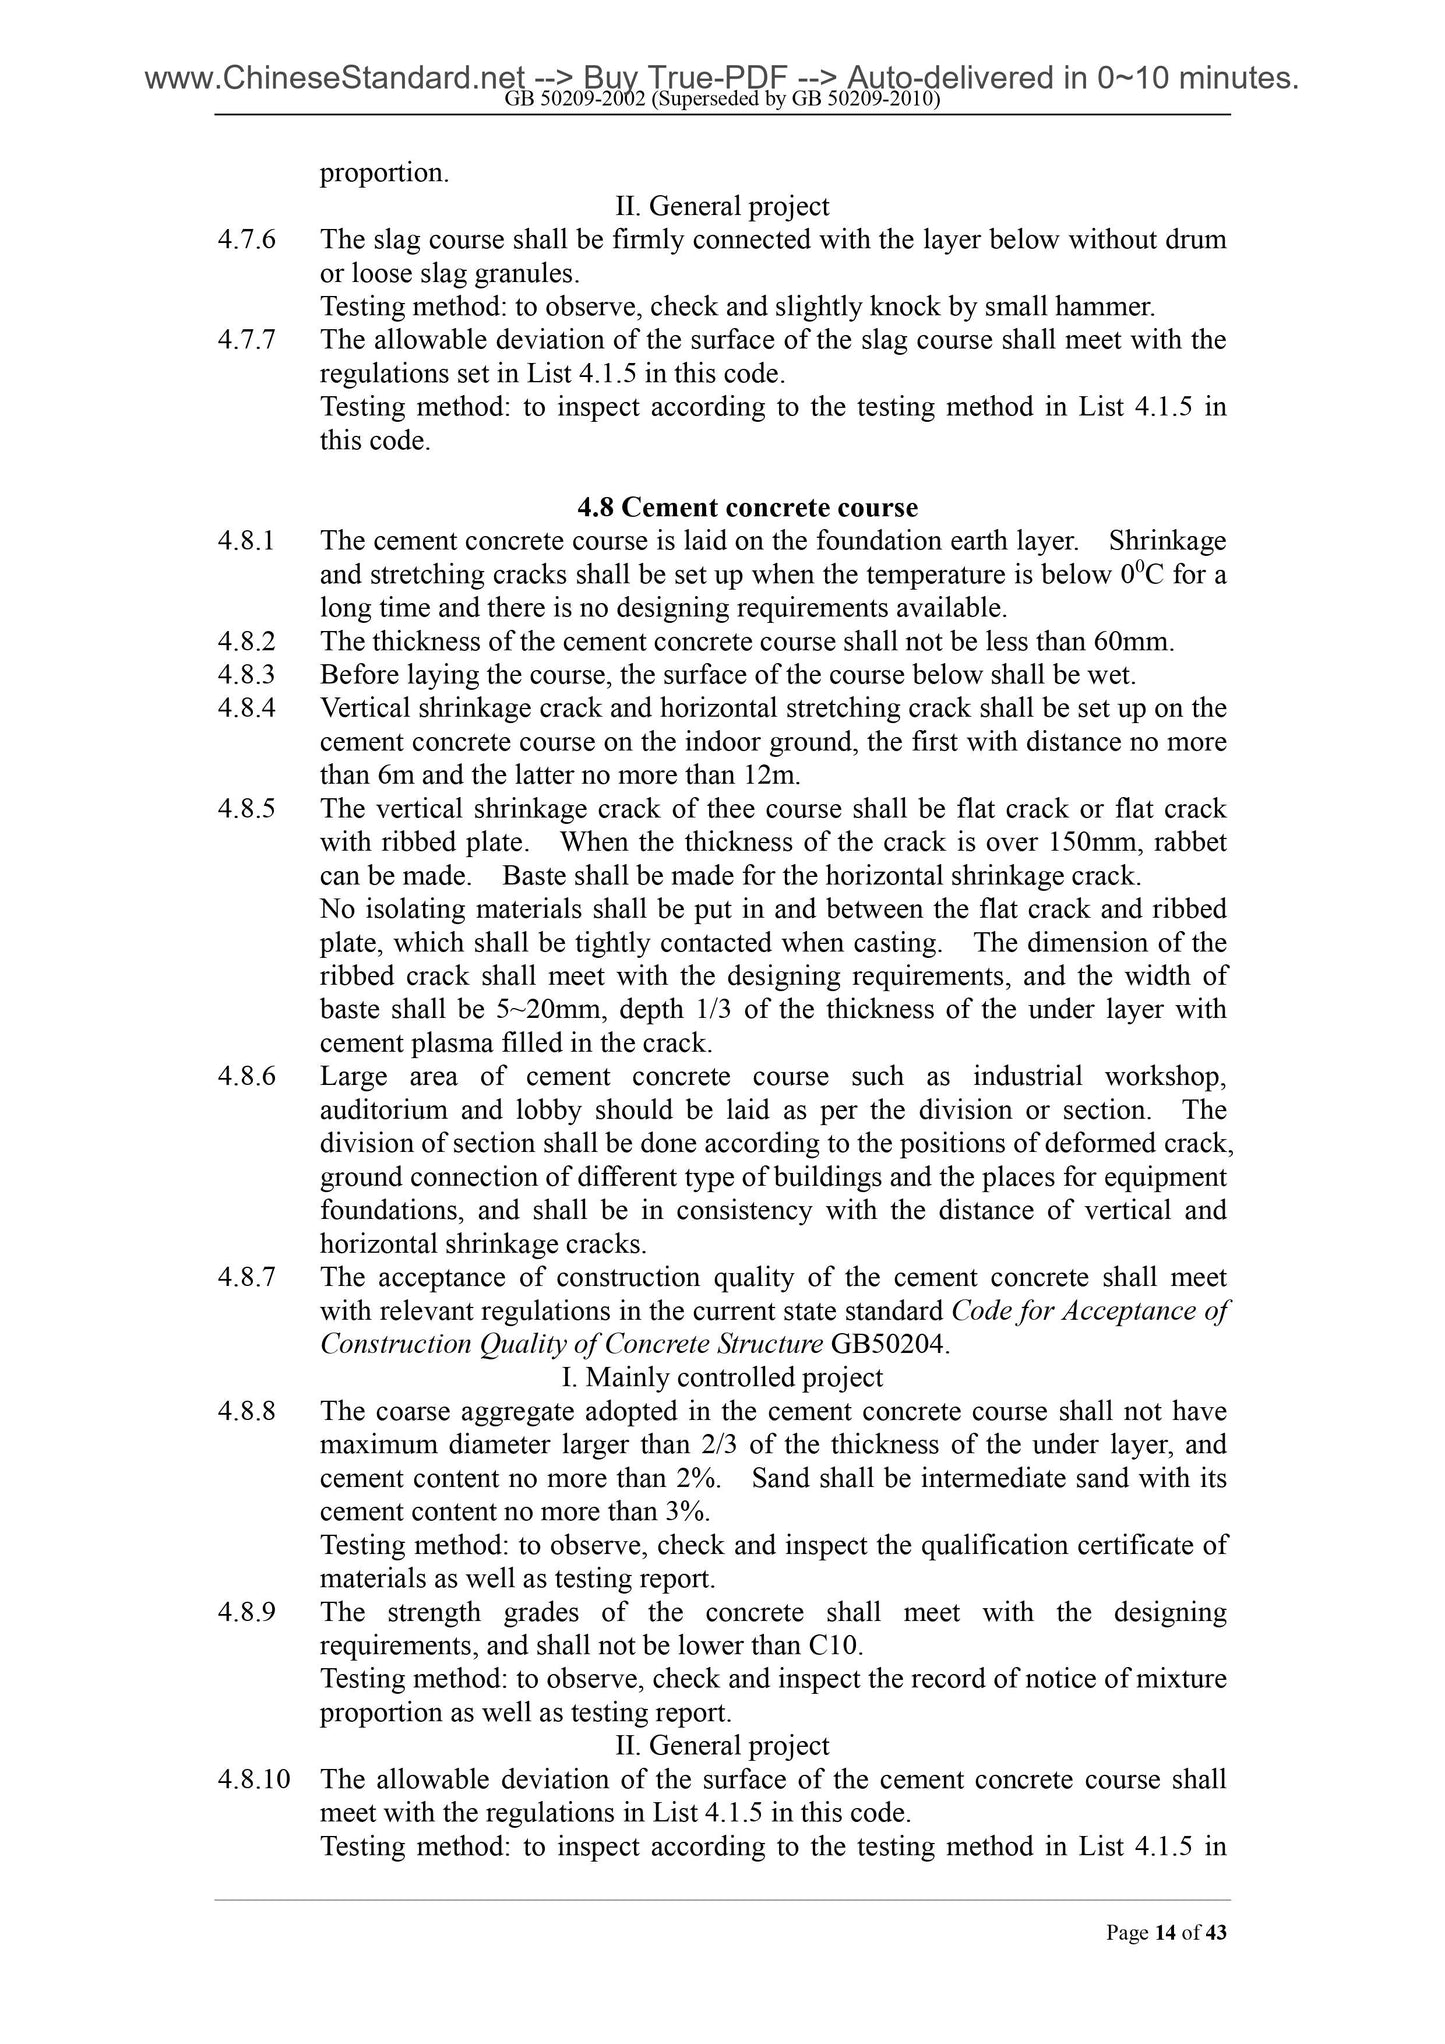 GB 50209-2002 Page 12